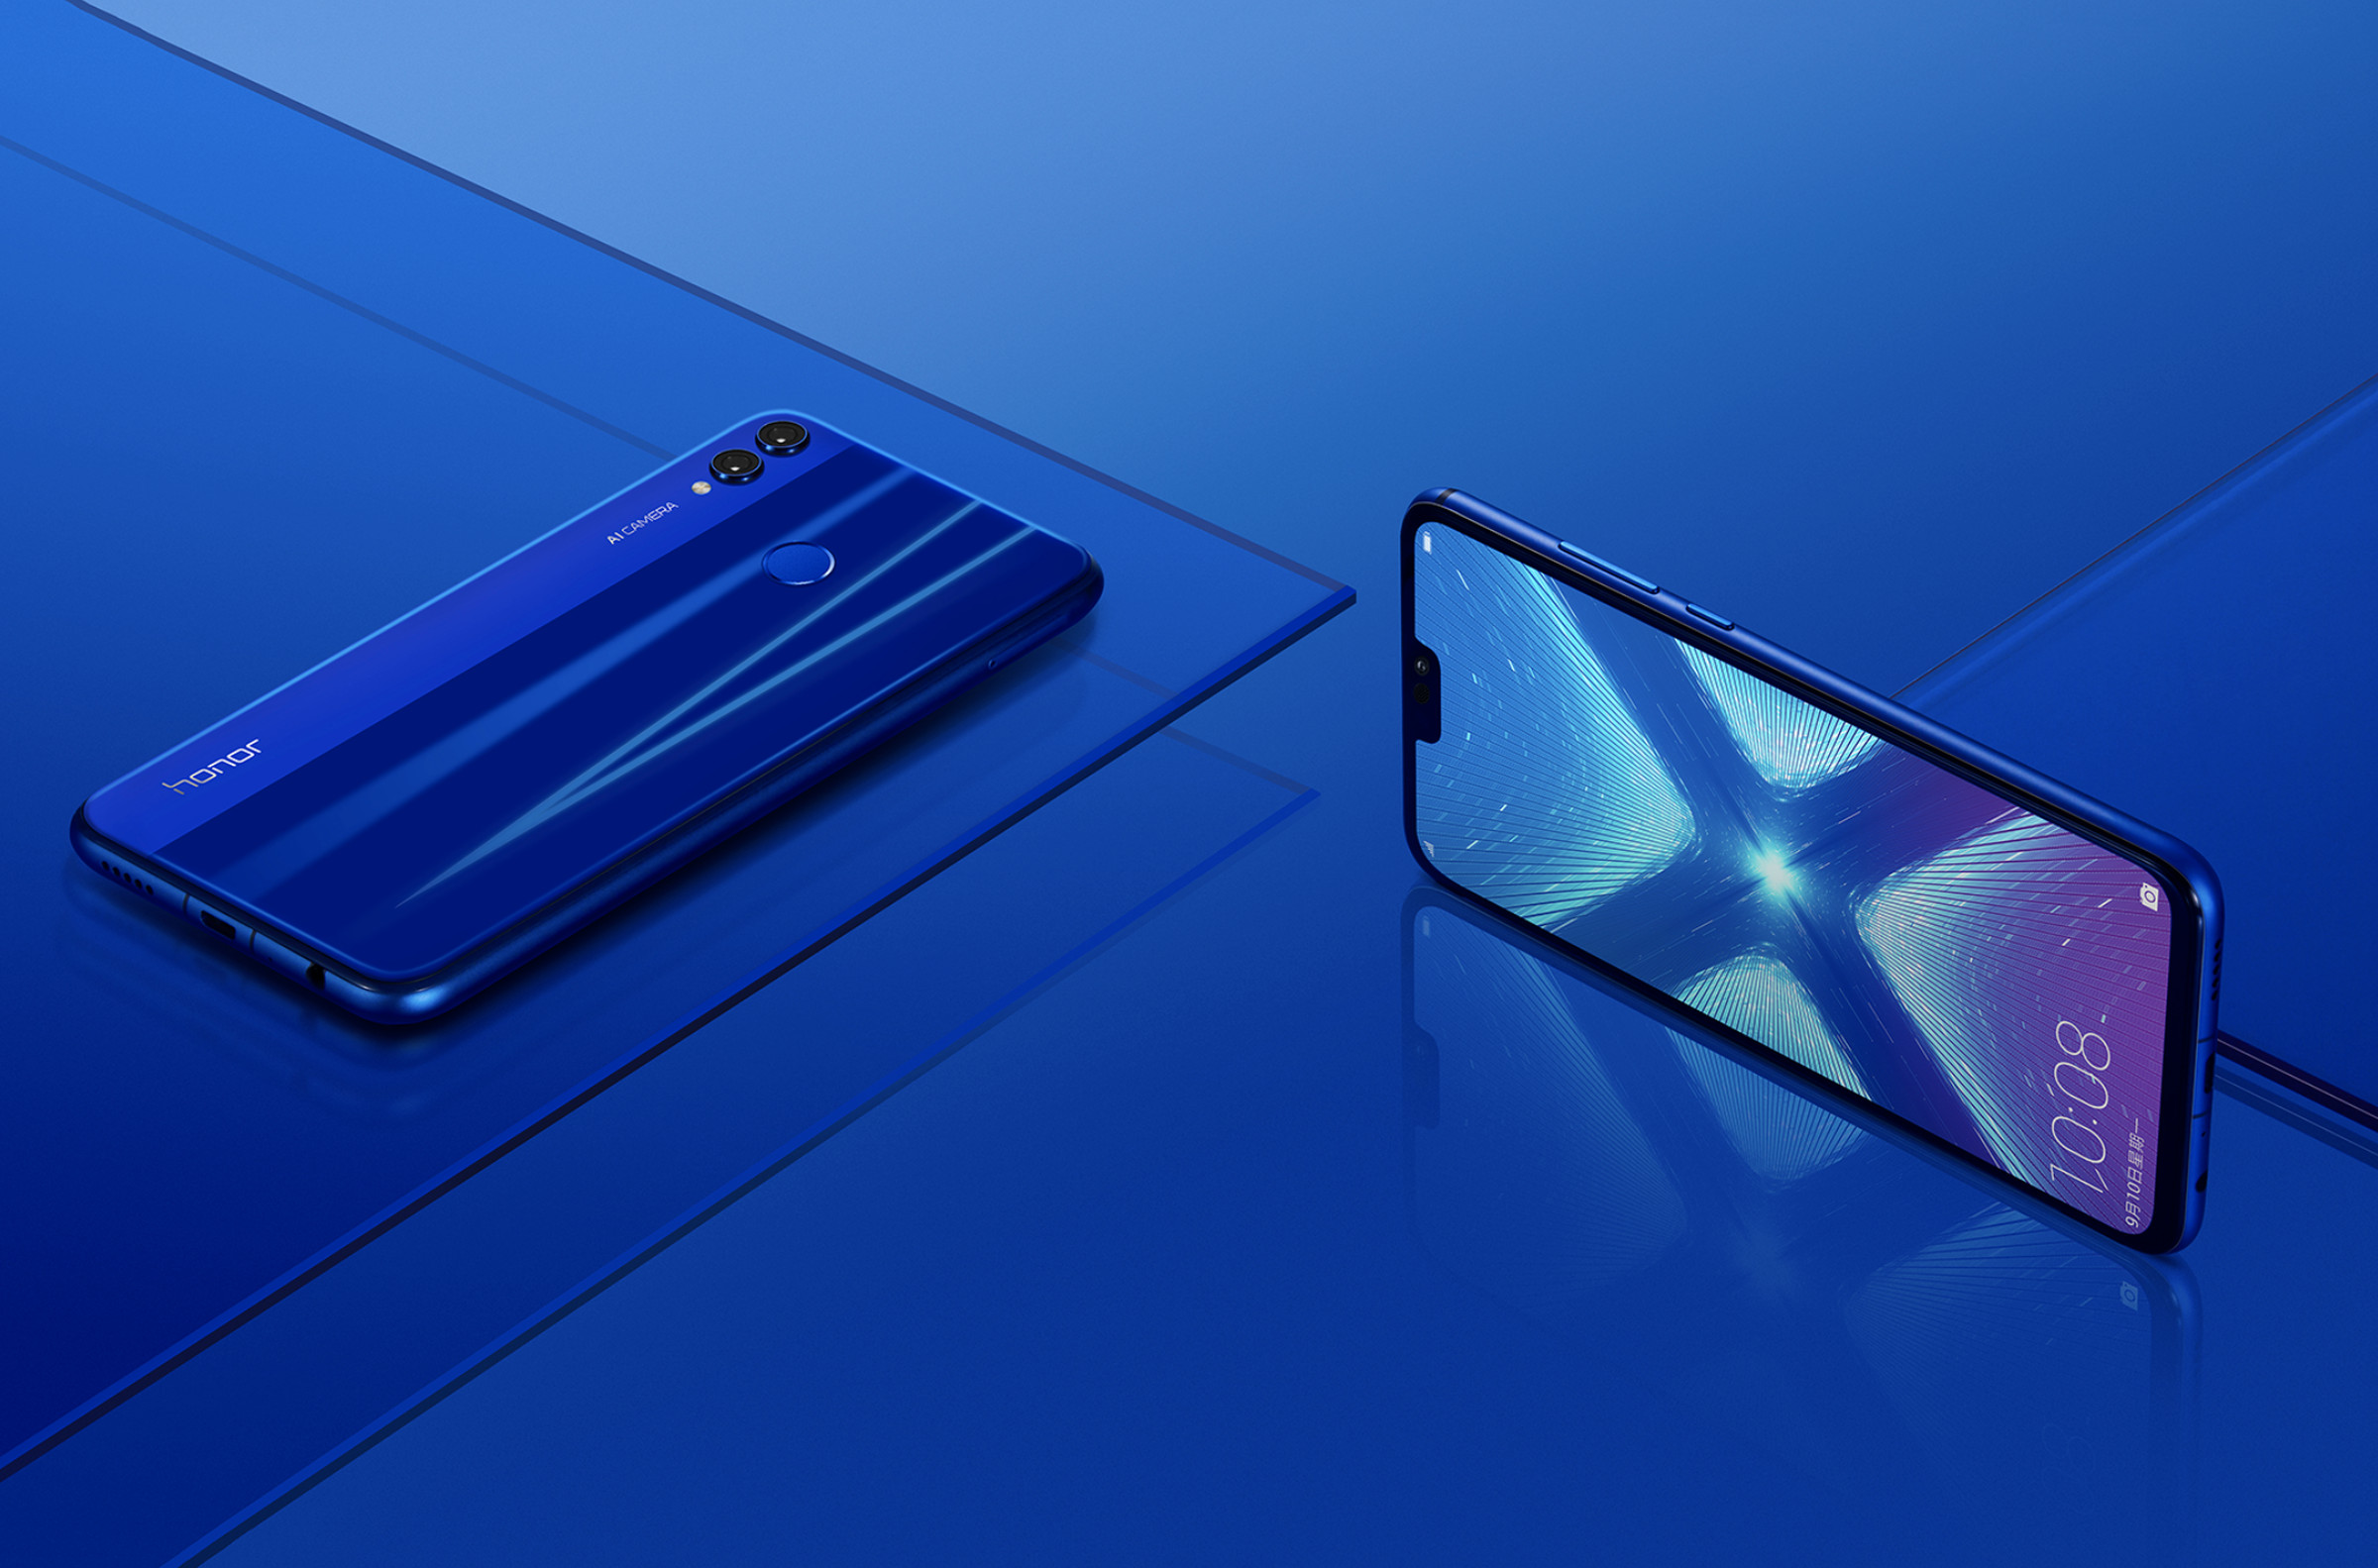 The smaller Honor 8X.